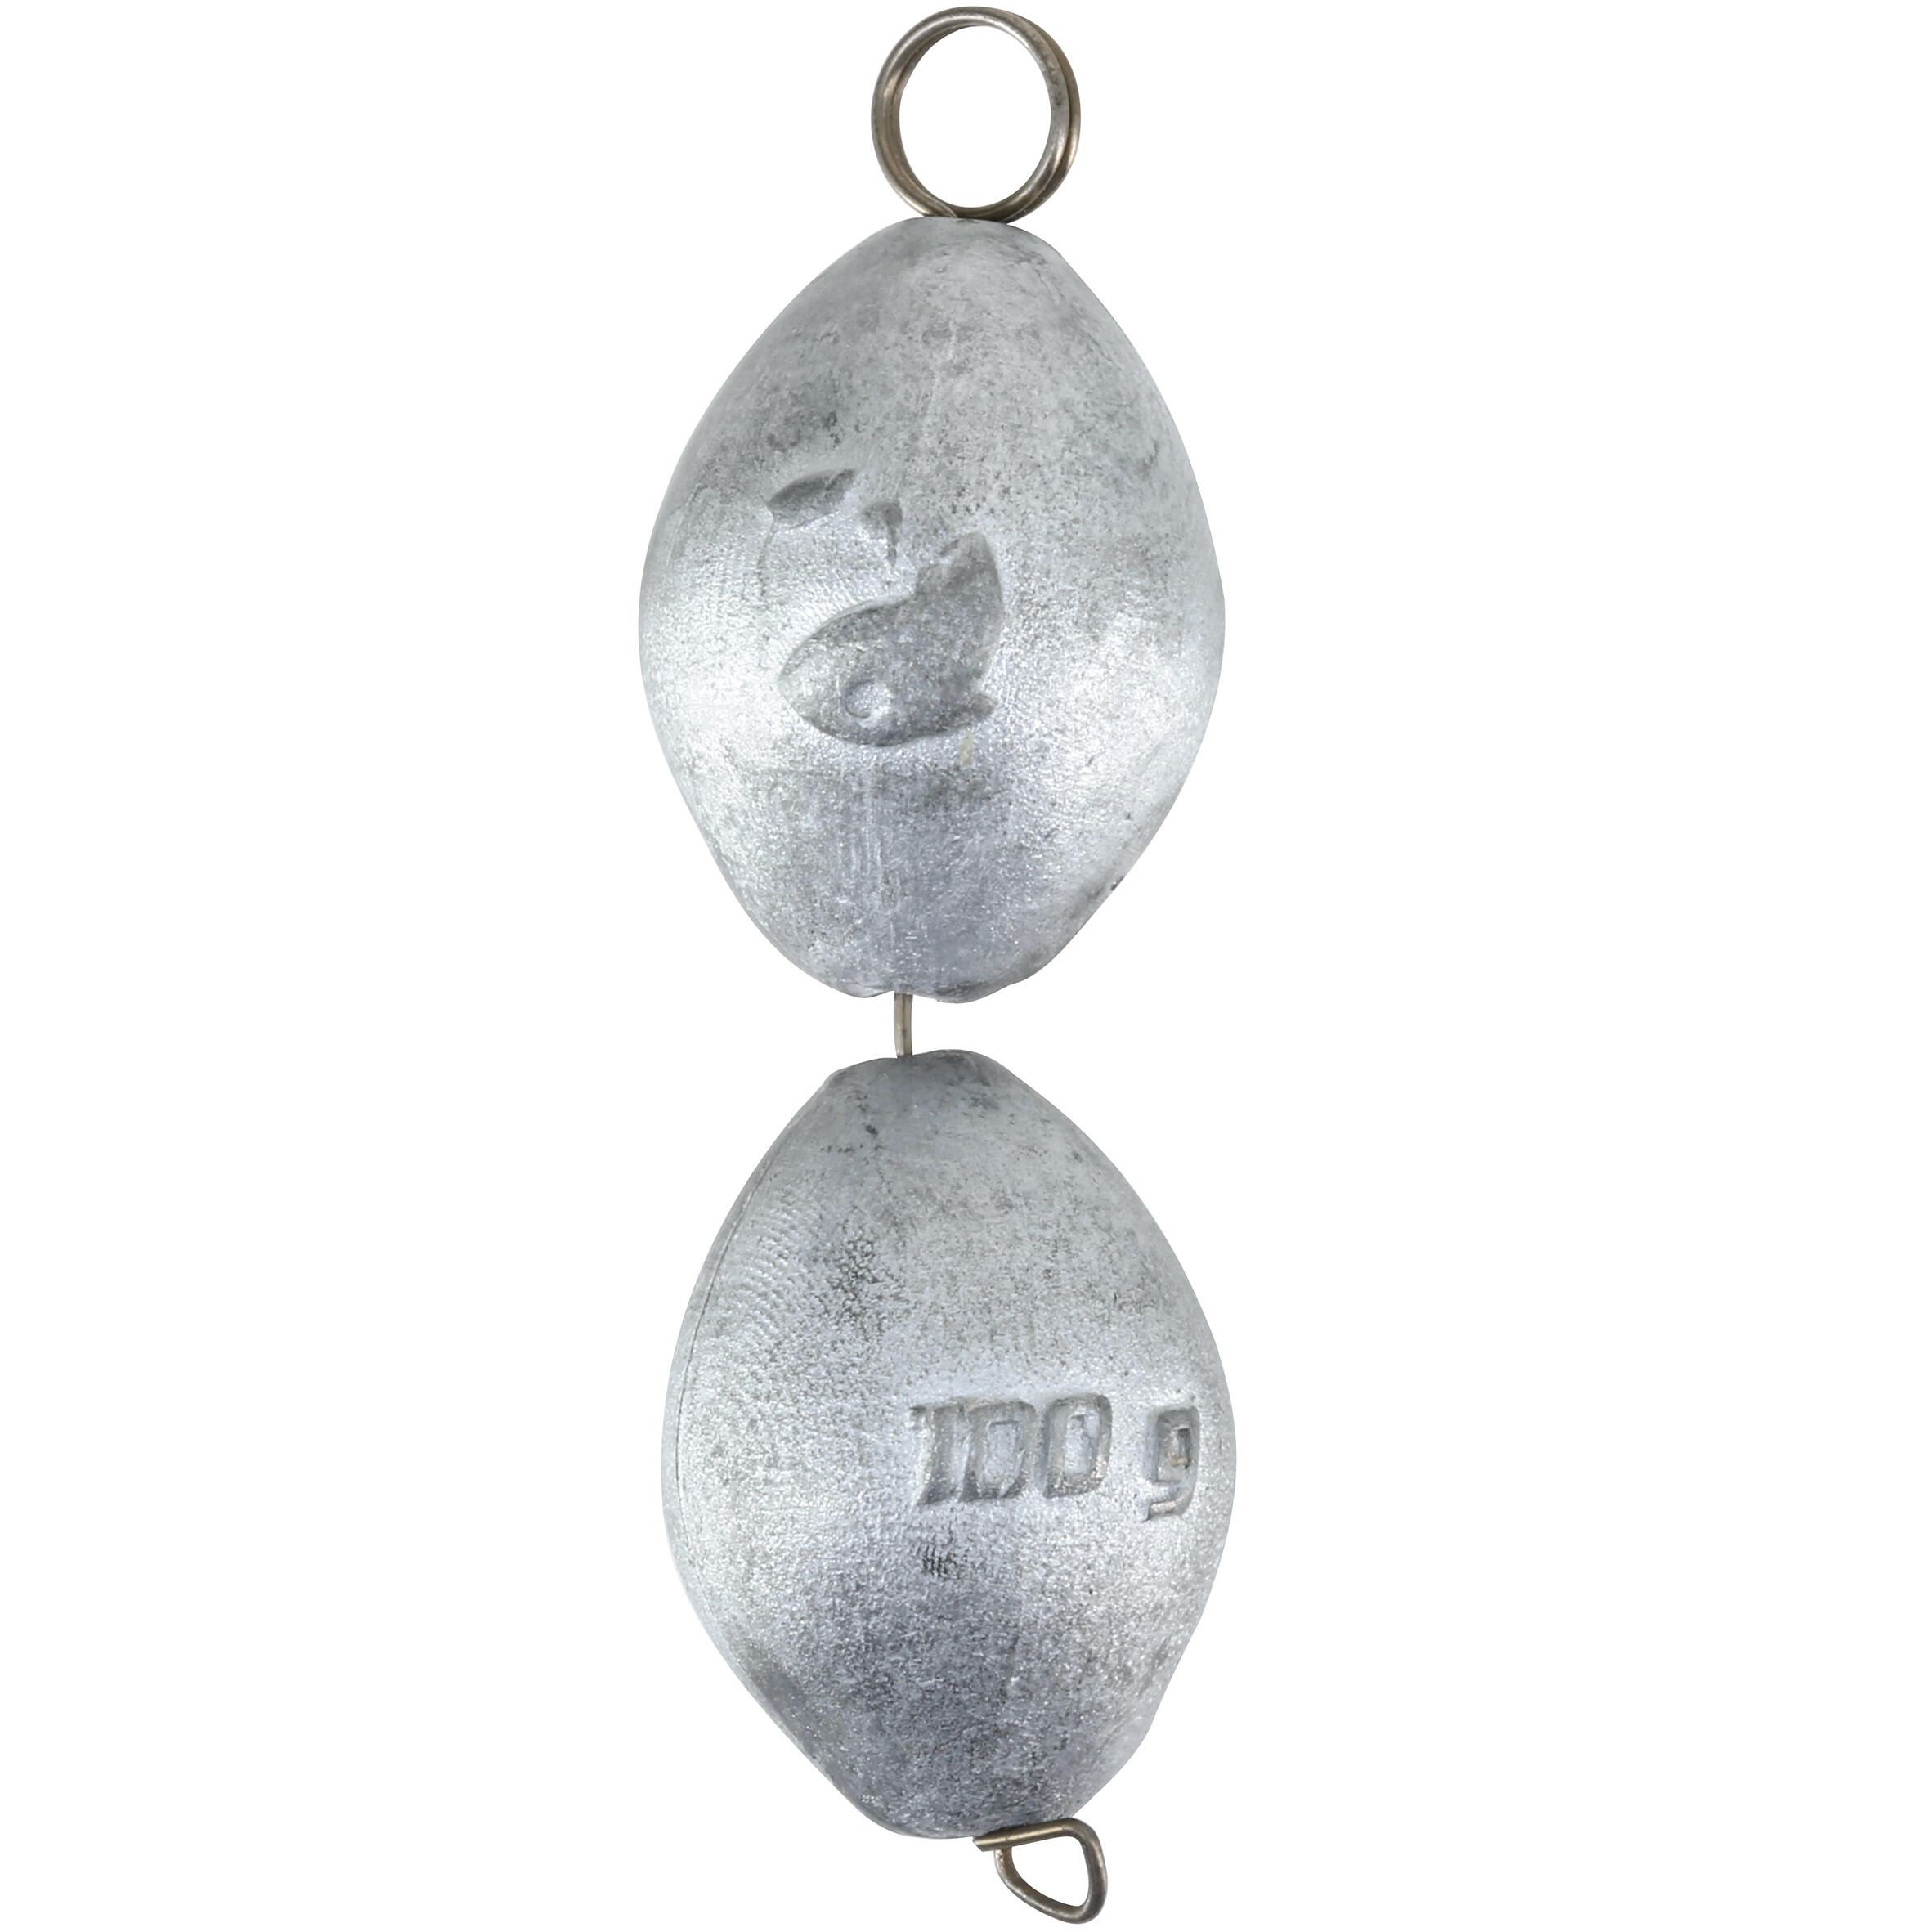 Olive lead-free ledgering weights 6/7